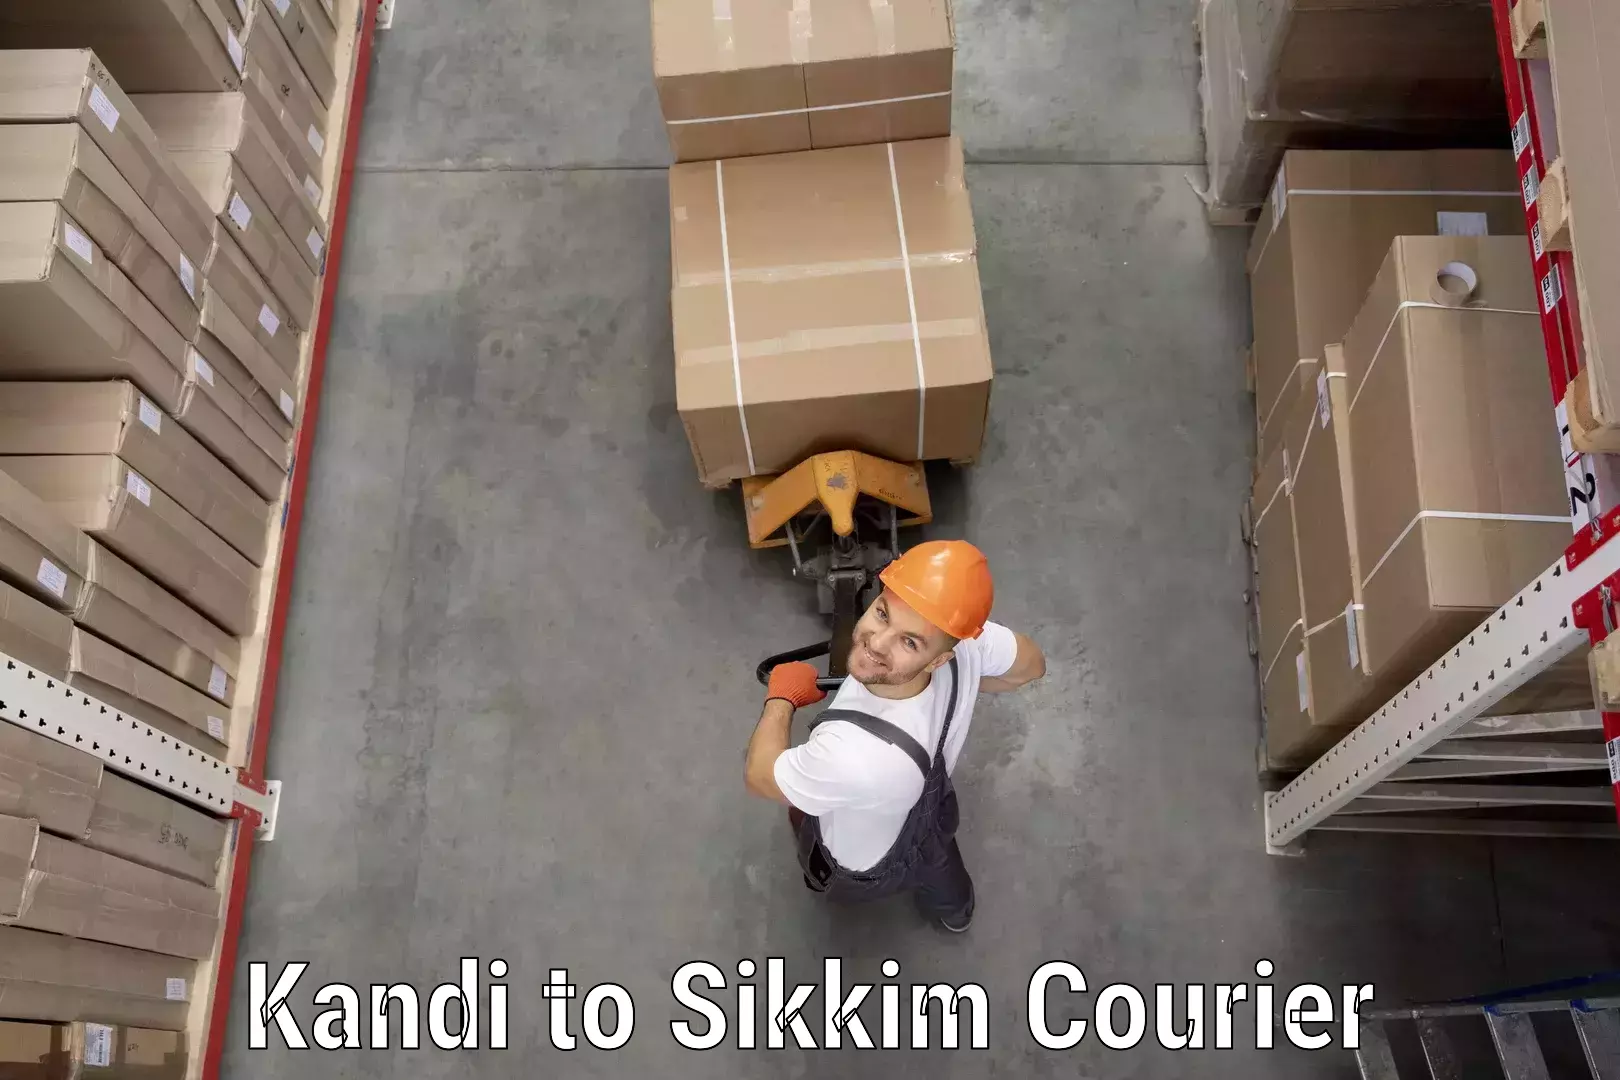 On-call courier service Kandi to East Sikkim